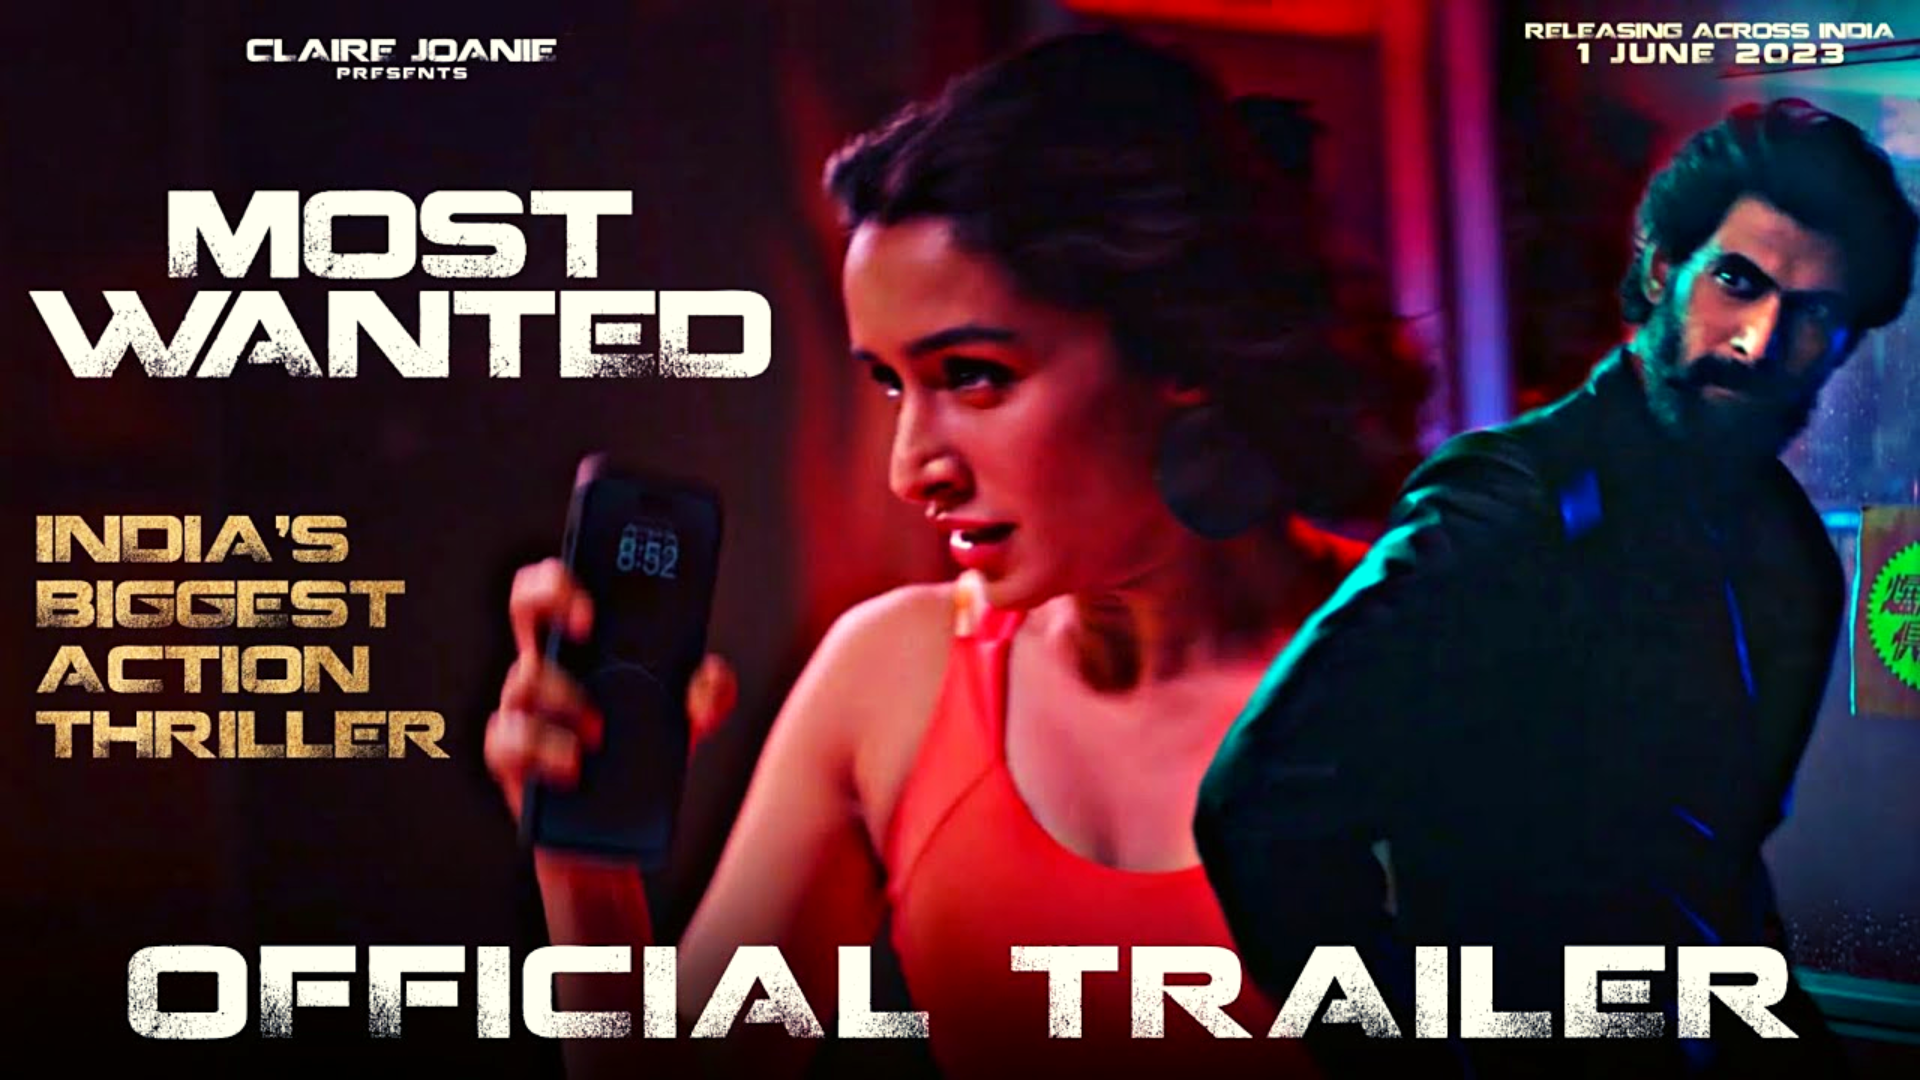 Most Wanted Movie Ticket Offers: Shraddha Kapoor Upcoming Movie